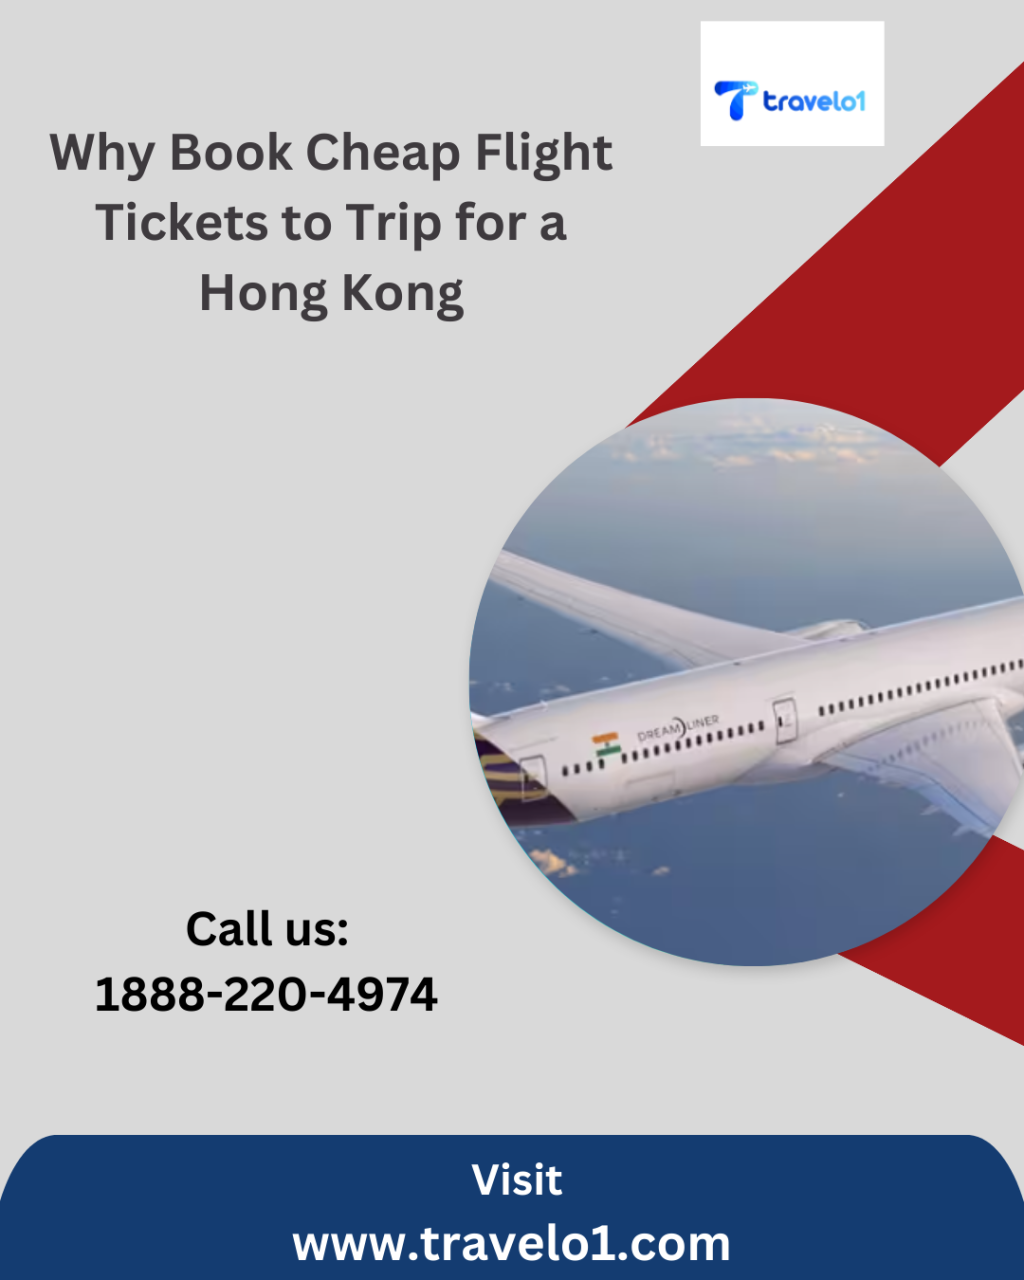 Why Book Cheap Flight Tickets to Trip for a Hong Kong